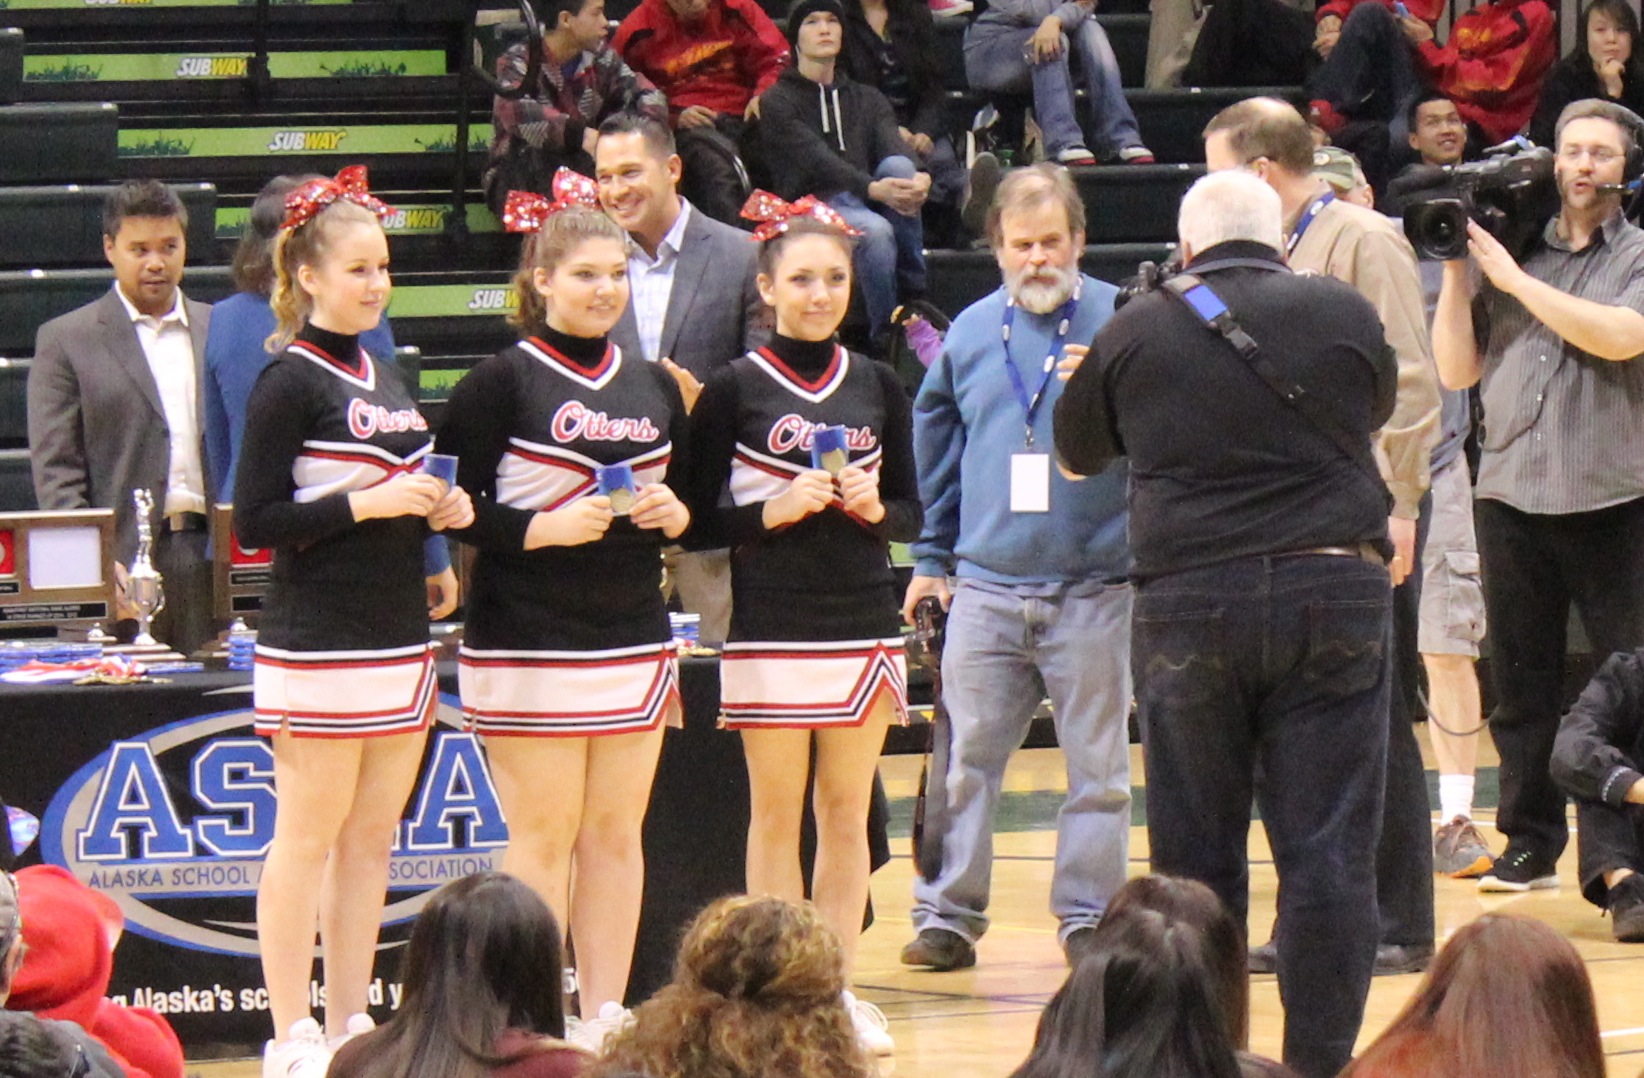 The Seldovia Sea Otter cheerleaders are recognized for their energetic support of their during the award ceremony at the ASAA 1A State Basketball Tournament. From left: Lisa Neumann, Violet Mitchell, Ariana Waterbury. -Photo by McKibben Jackinsky, Homer News